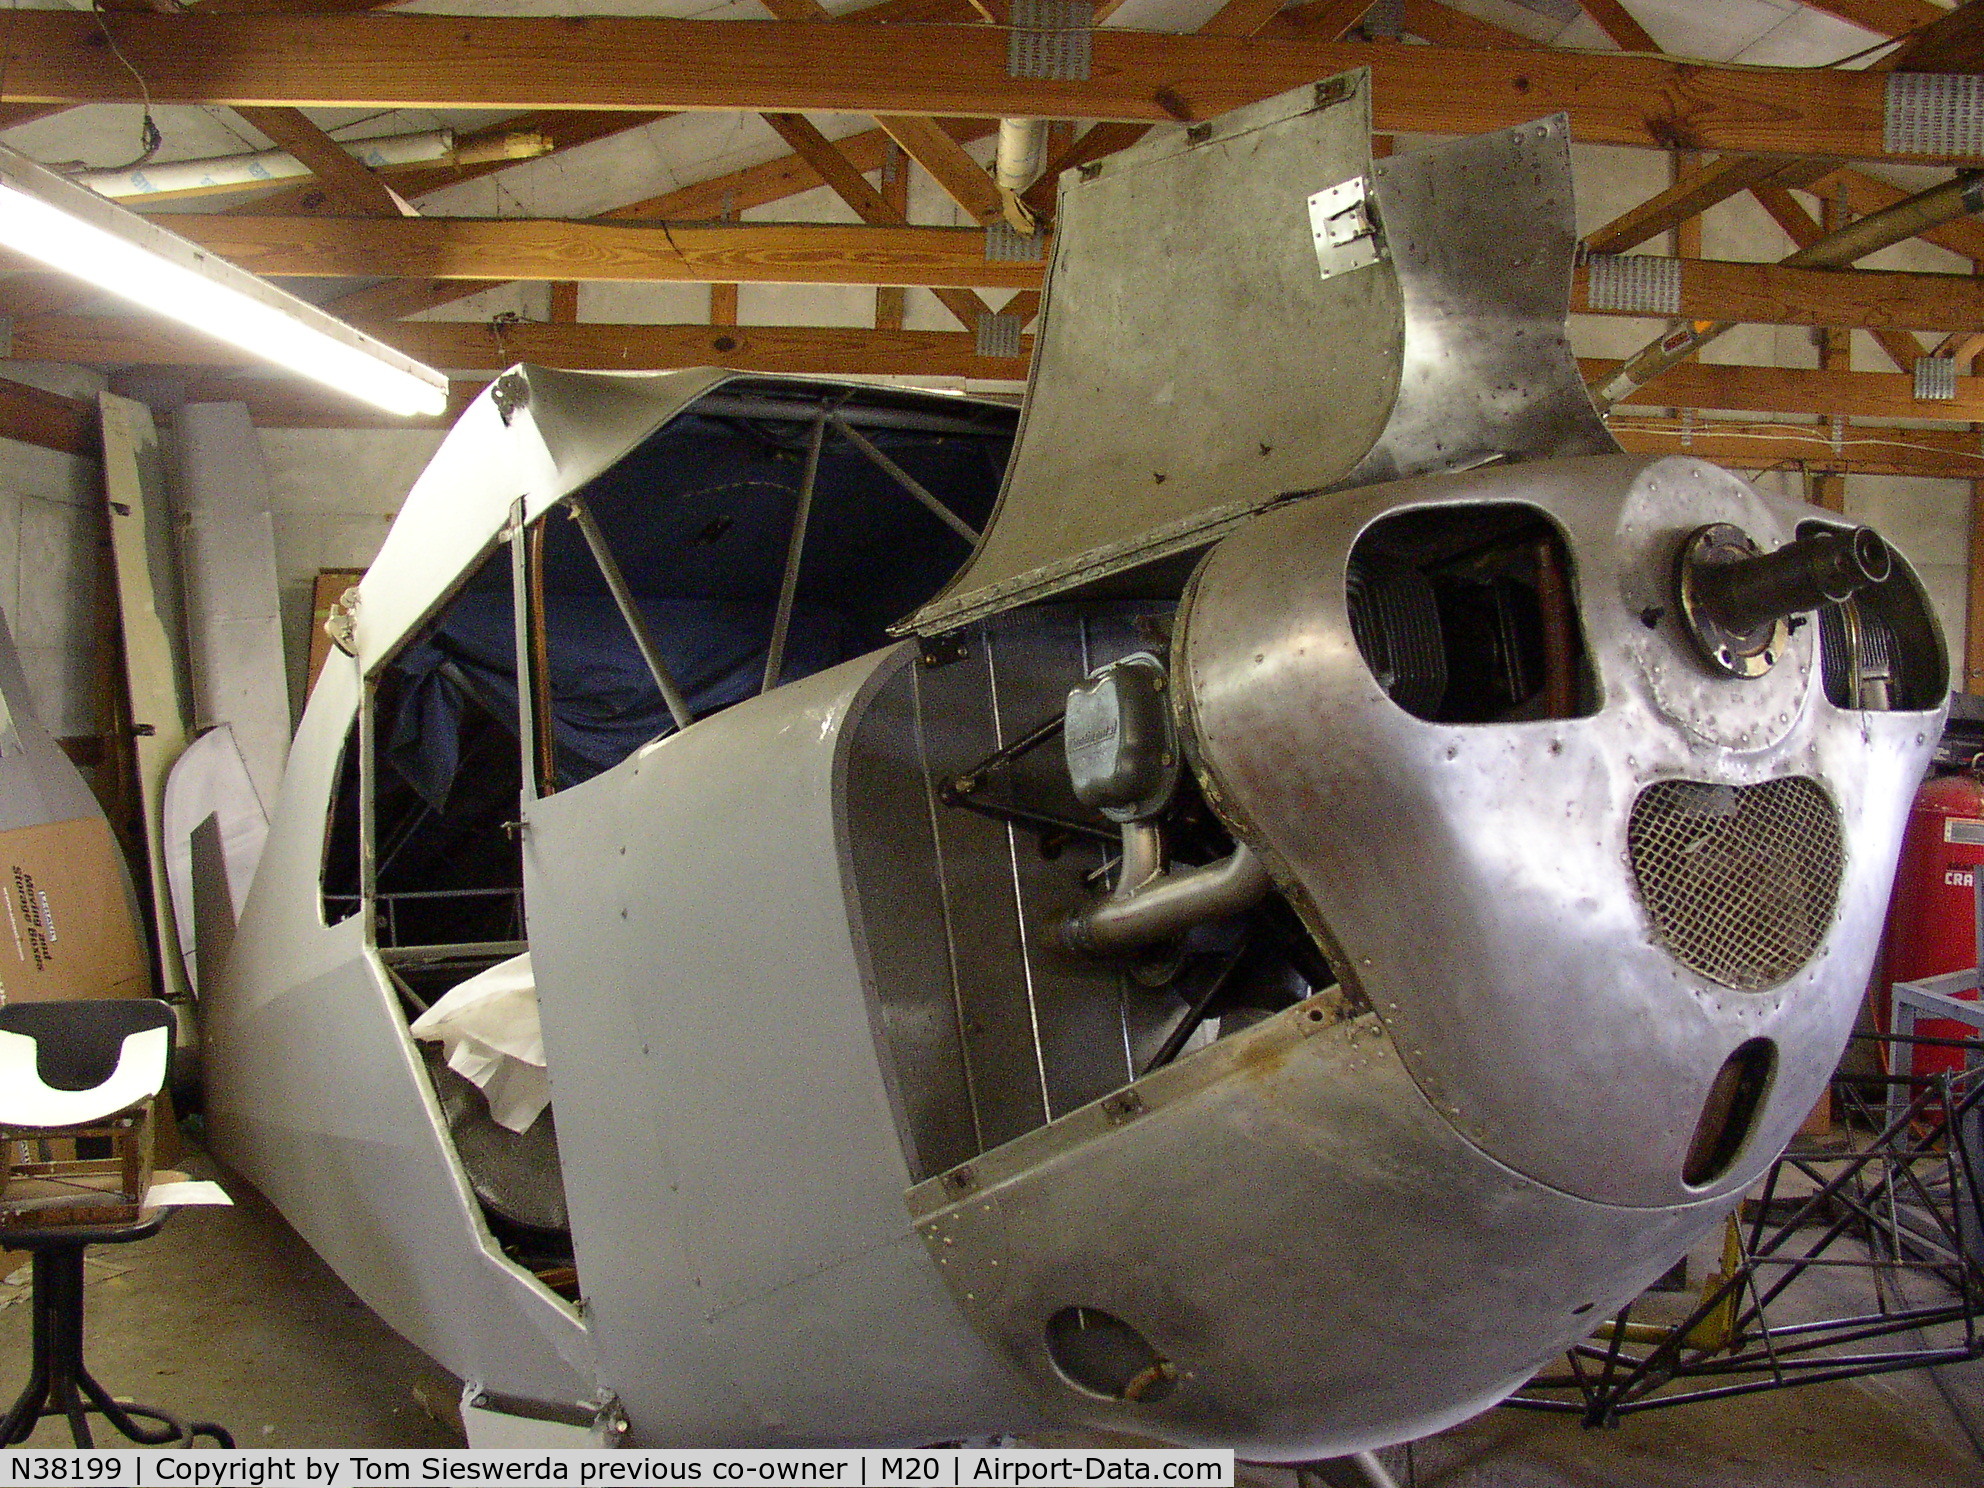 N38199, 1941 Piper J4E C/N 4-1563, N38199     in process of restoration in 2006 in Leitchfield, KY